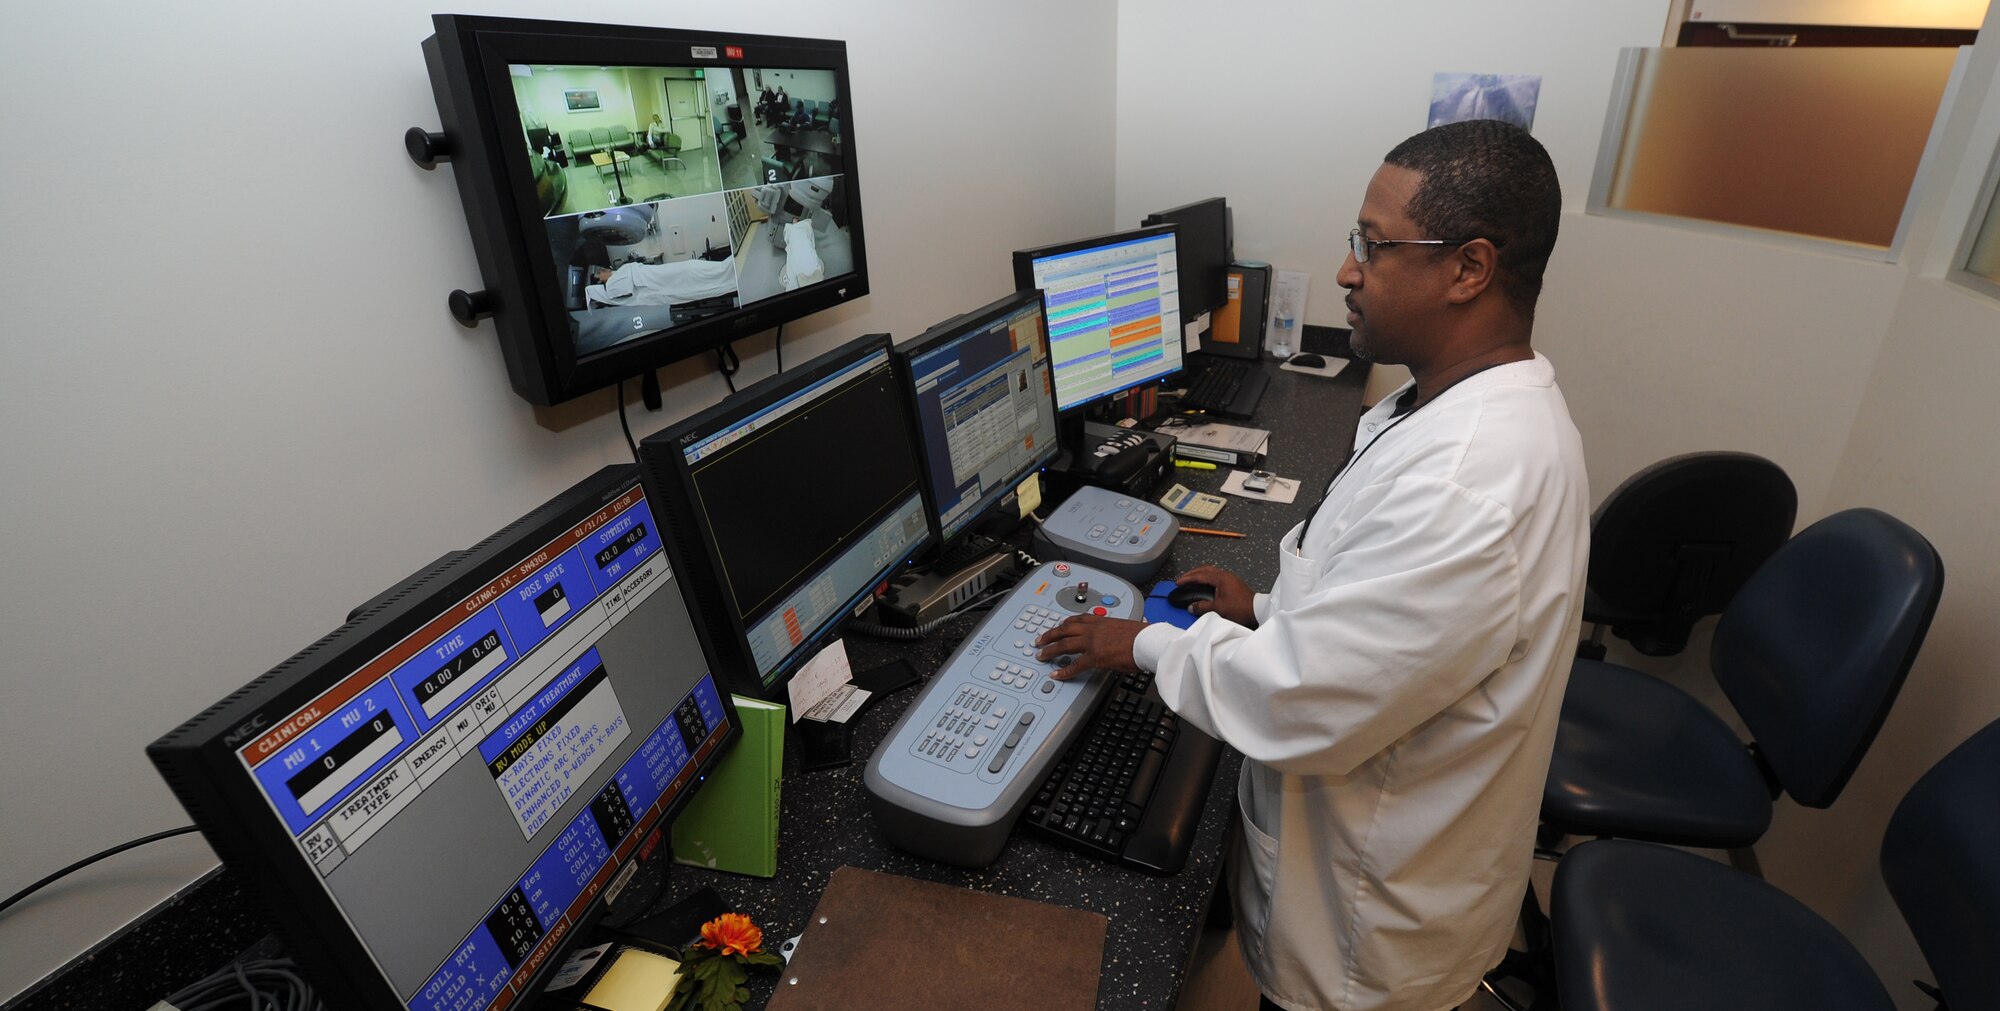 Radiation therapist Rudie Collins operates and monitors patient's at the treatment area console, Jan. 31. (U.S. Air Force photo/ Staff Sgt. Liliana Moreno)